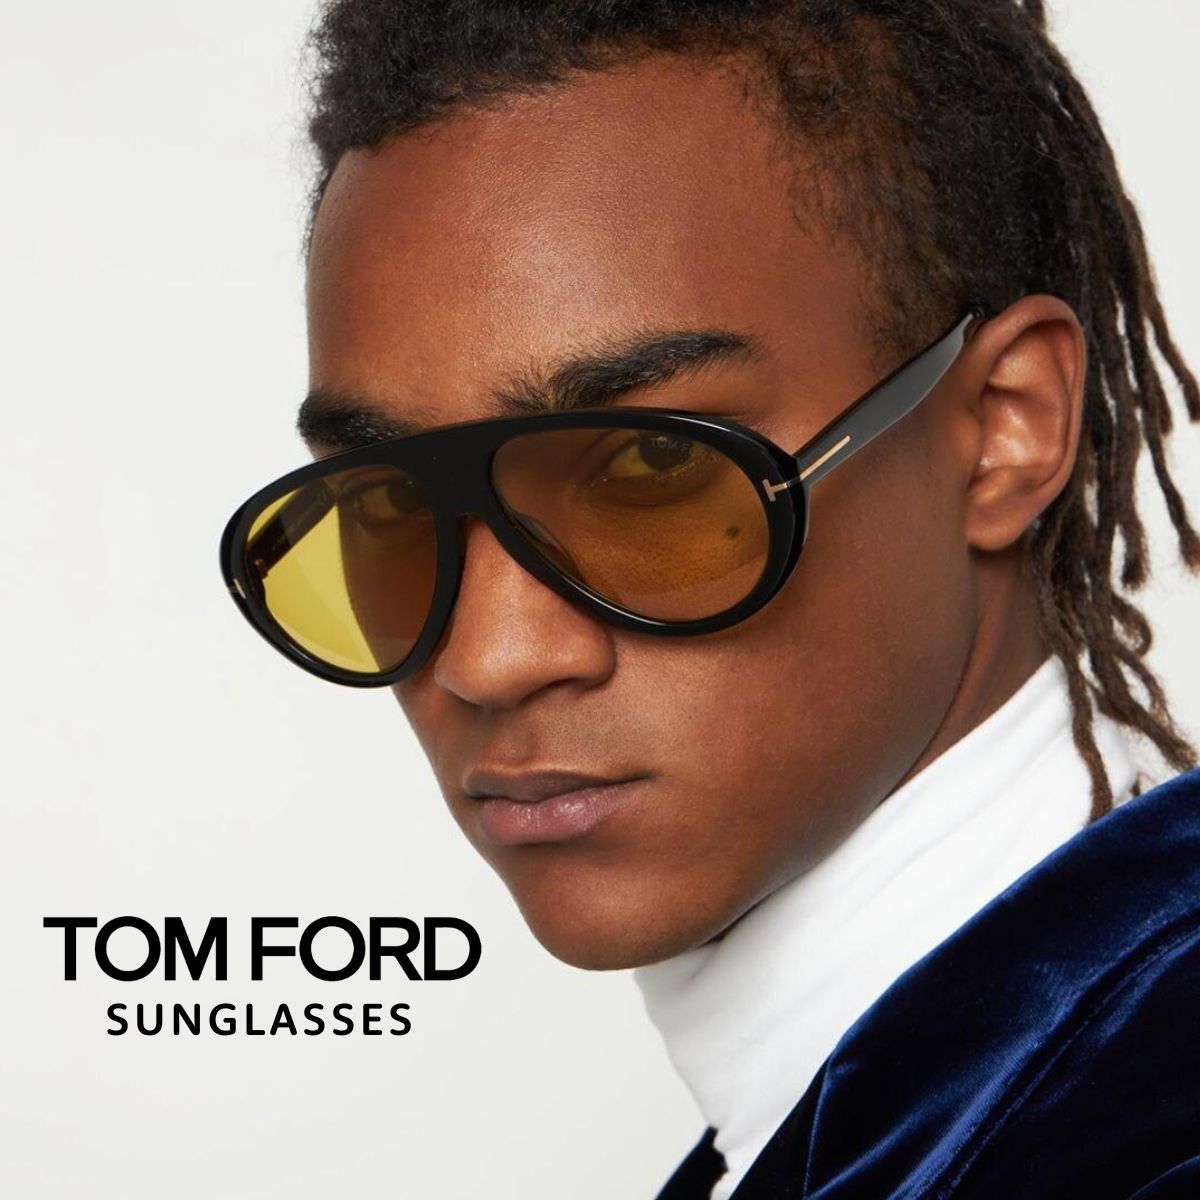 "Browse Optorium's Tom Ford Sunglasses collection online for the best offers. Enjoy a wide range of styles and designs with the convenience of Cash on Delivery (COD) and easy returns. Free shipping available."